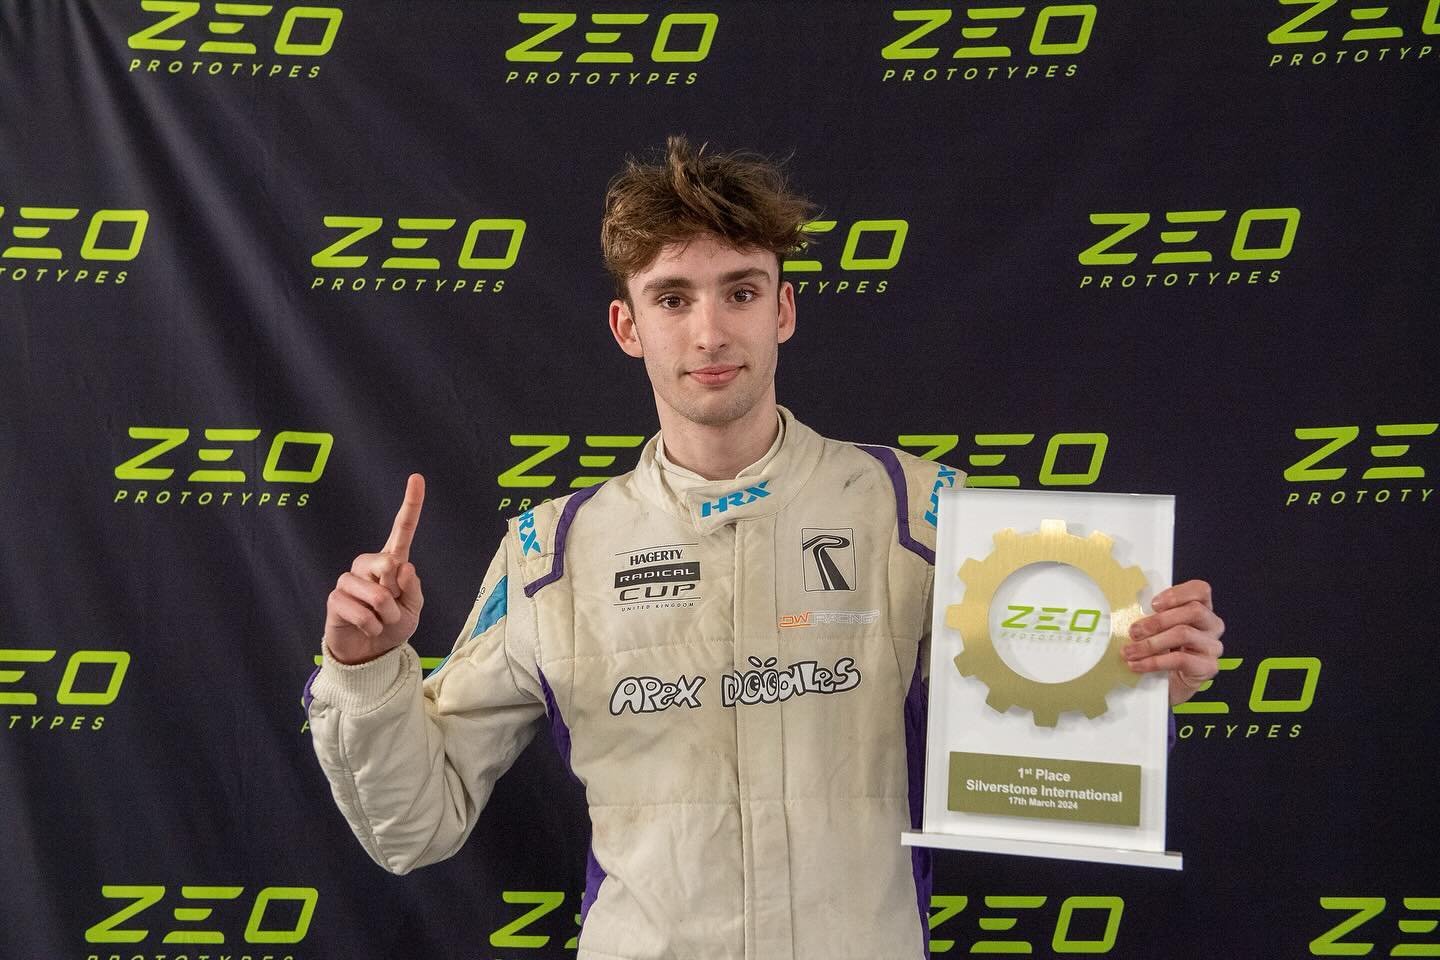 First Race weekend of the Year 🏆
-
@zeoprototypes Round 1 (🇬🇧)
-
Quali: 🥈
-
Race 1: DNF - due to an overheating issue, the car was stuck in a safe mode to prevent further damage leading us to retire 
-
Race 2: 🥇+🟣⏱️ - got into the lead on the f